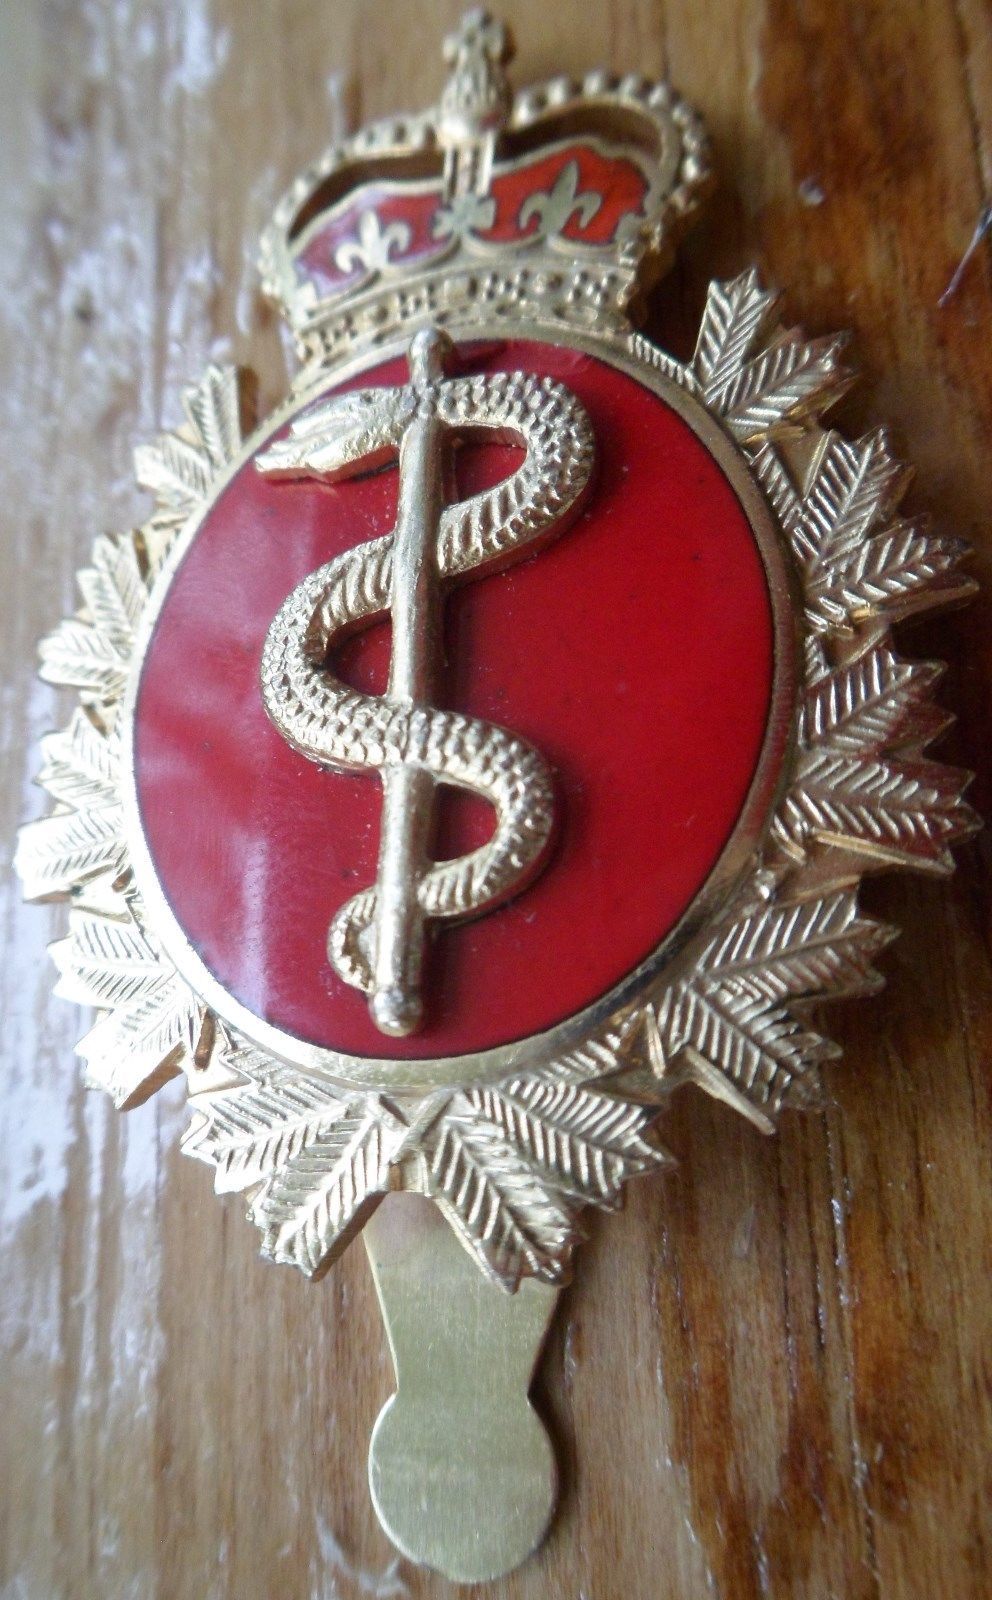 QUECEC, CANADA. CANADIAN ARMY RCAMC MEDICAL CORPS. LARGE ENAMELED CLIP PIN 1984 - $20.00